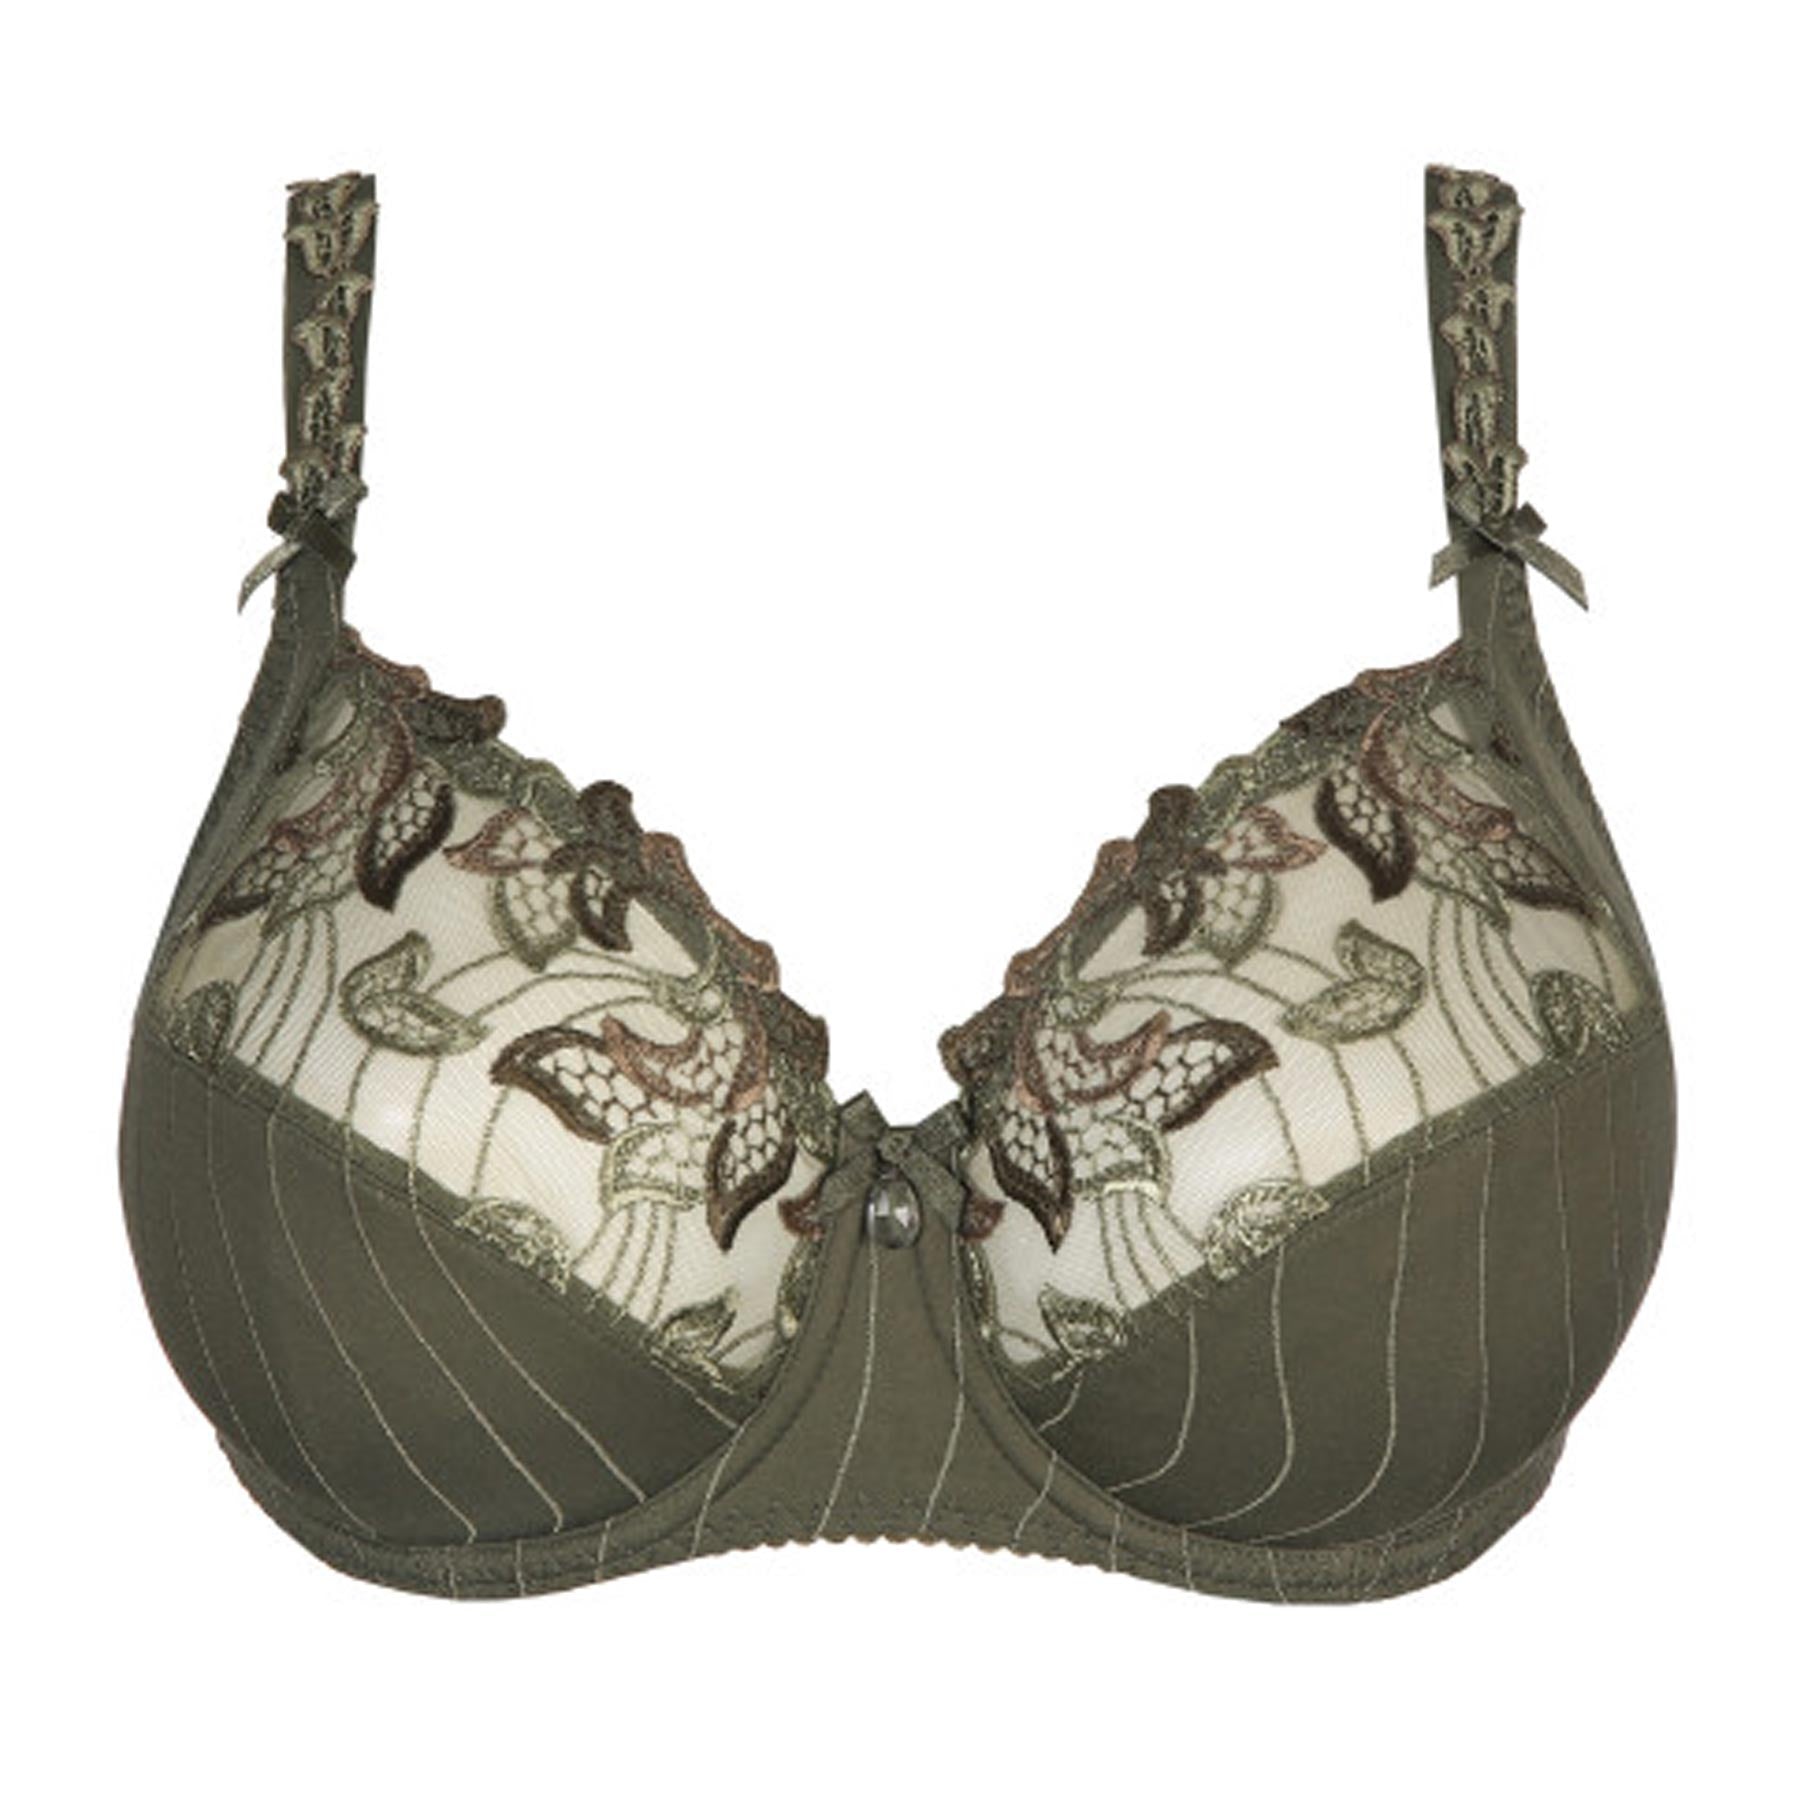 Prima Donna Women's -1810 Deauville Full Cup Bra 016, Natural, 32J at   Women's Clothing store